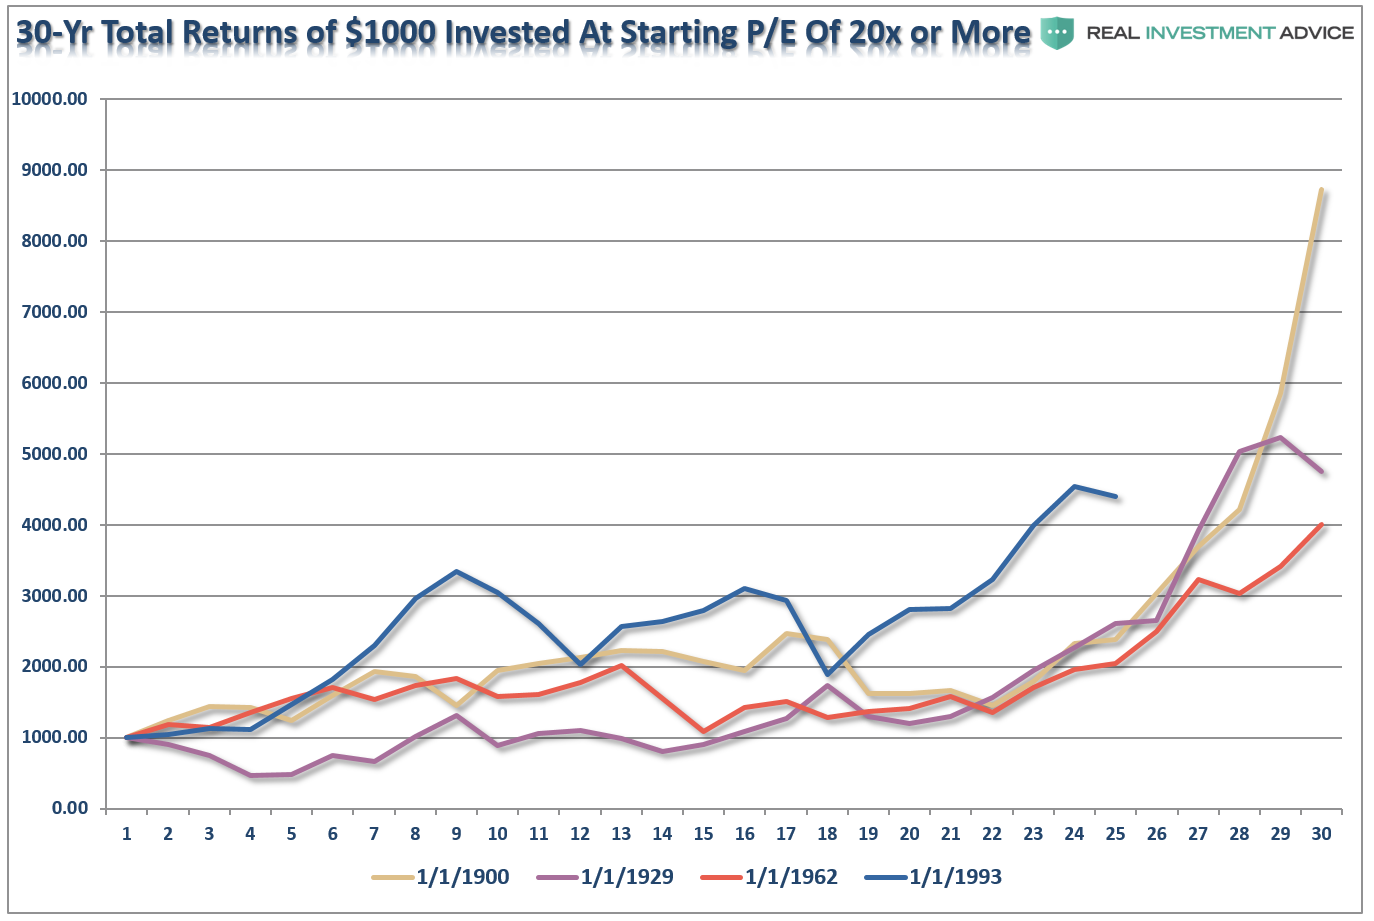 30-Y Total Returns of $1000 at Starting P/E of 20x or More